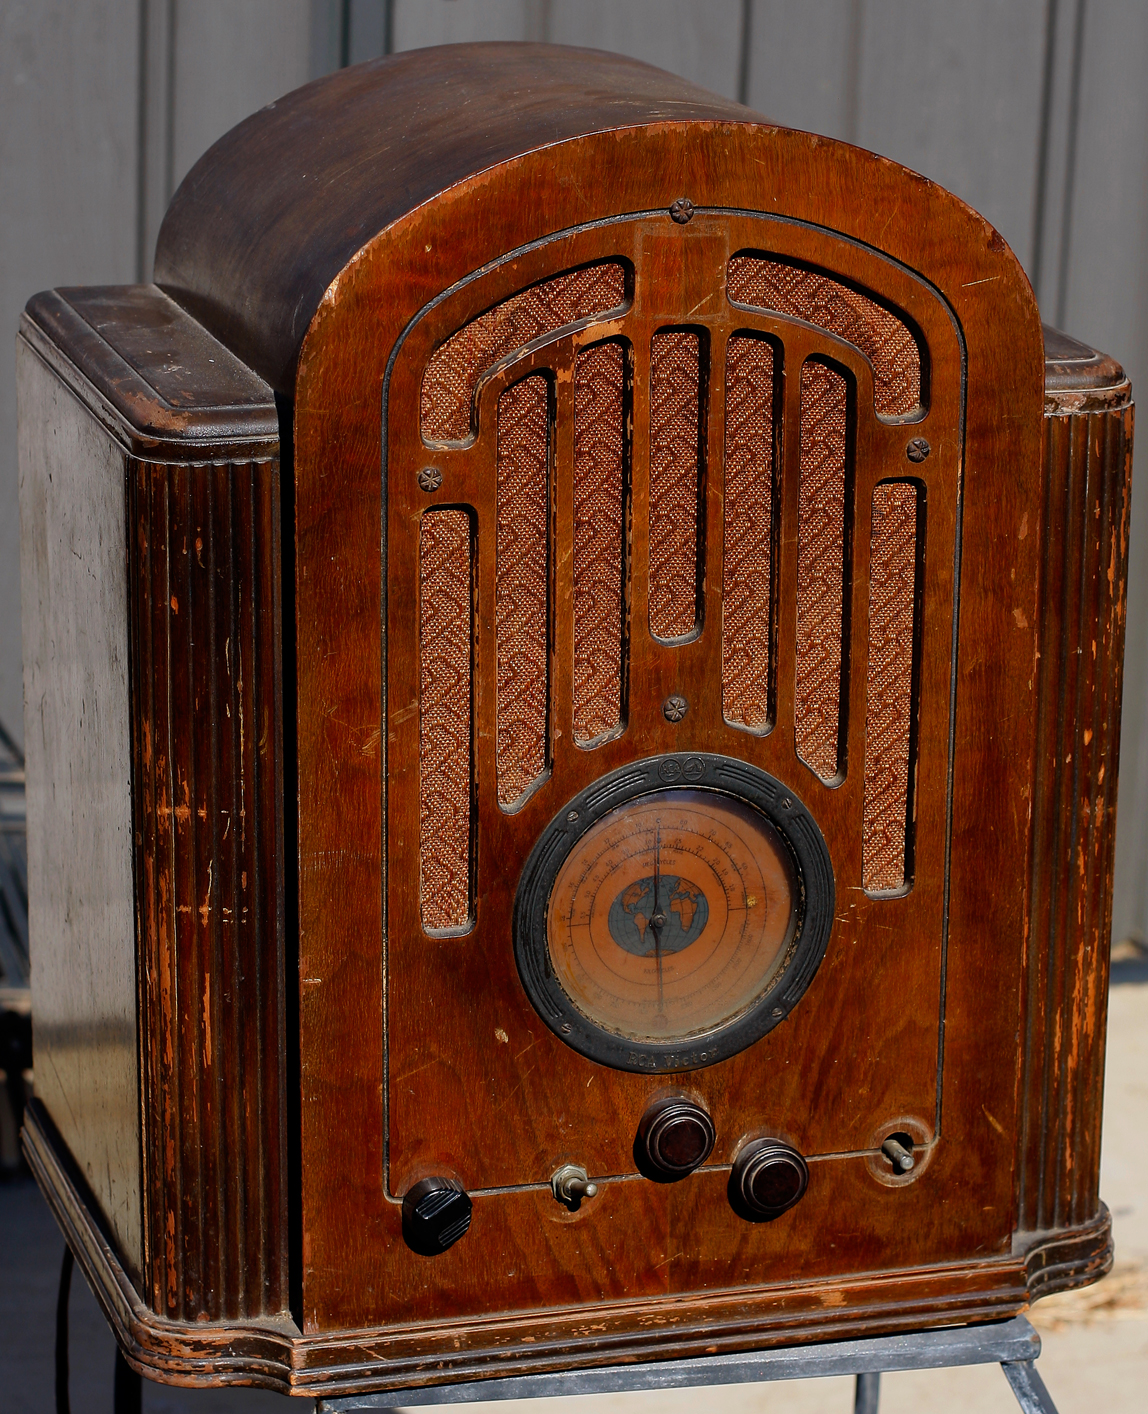 RCA 128 tombstone/cathedral radio